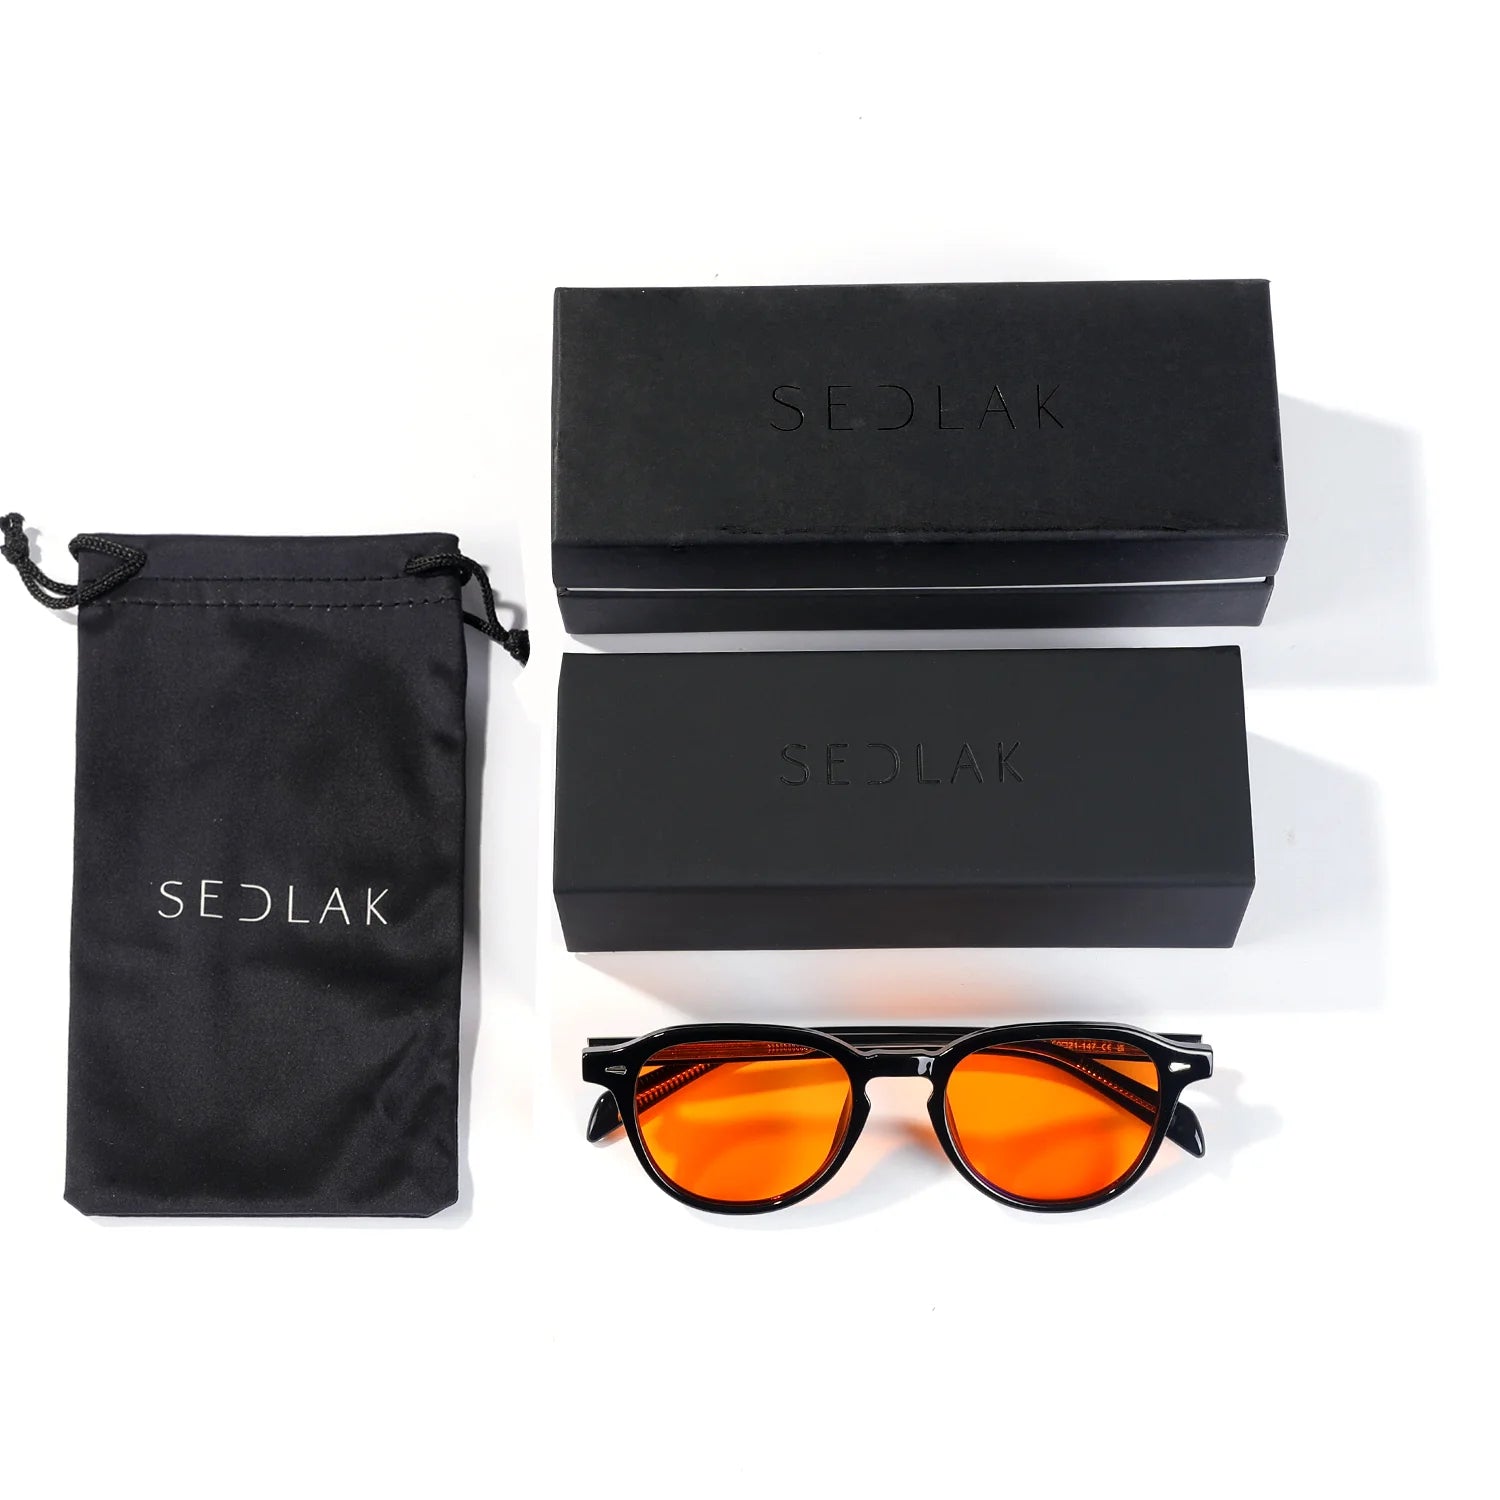 Sunglasses with orange lenses beside two black cases and a pouch with 'SEDLAK' branding.